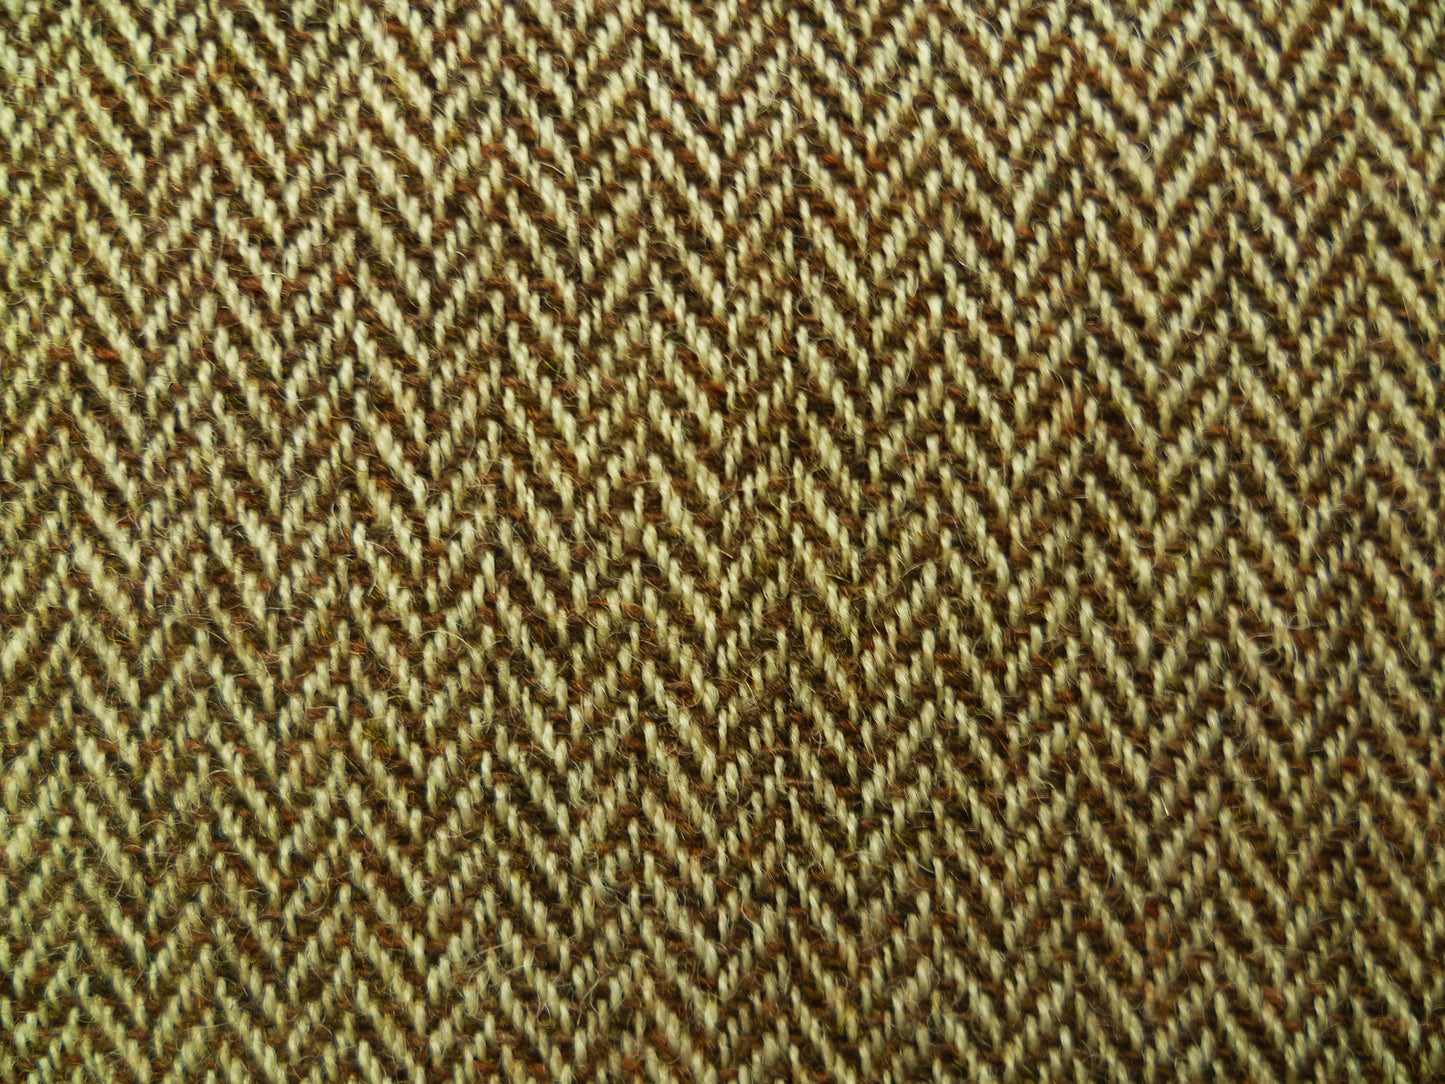 100% Worsted Wool 10-11 oz